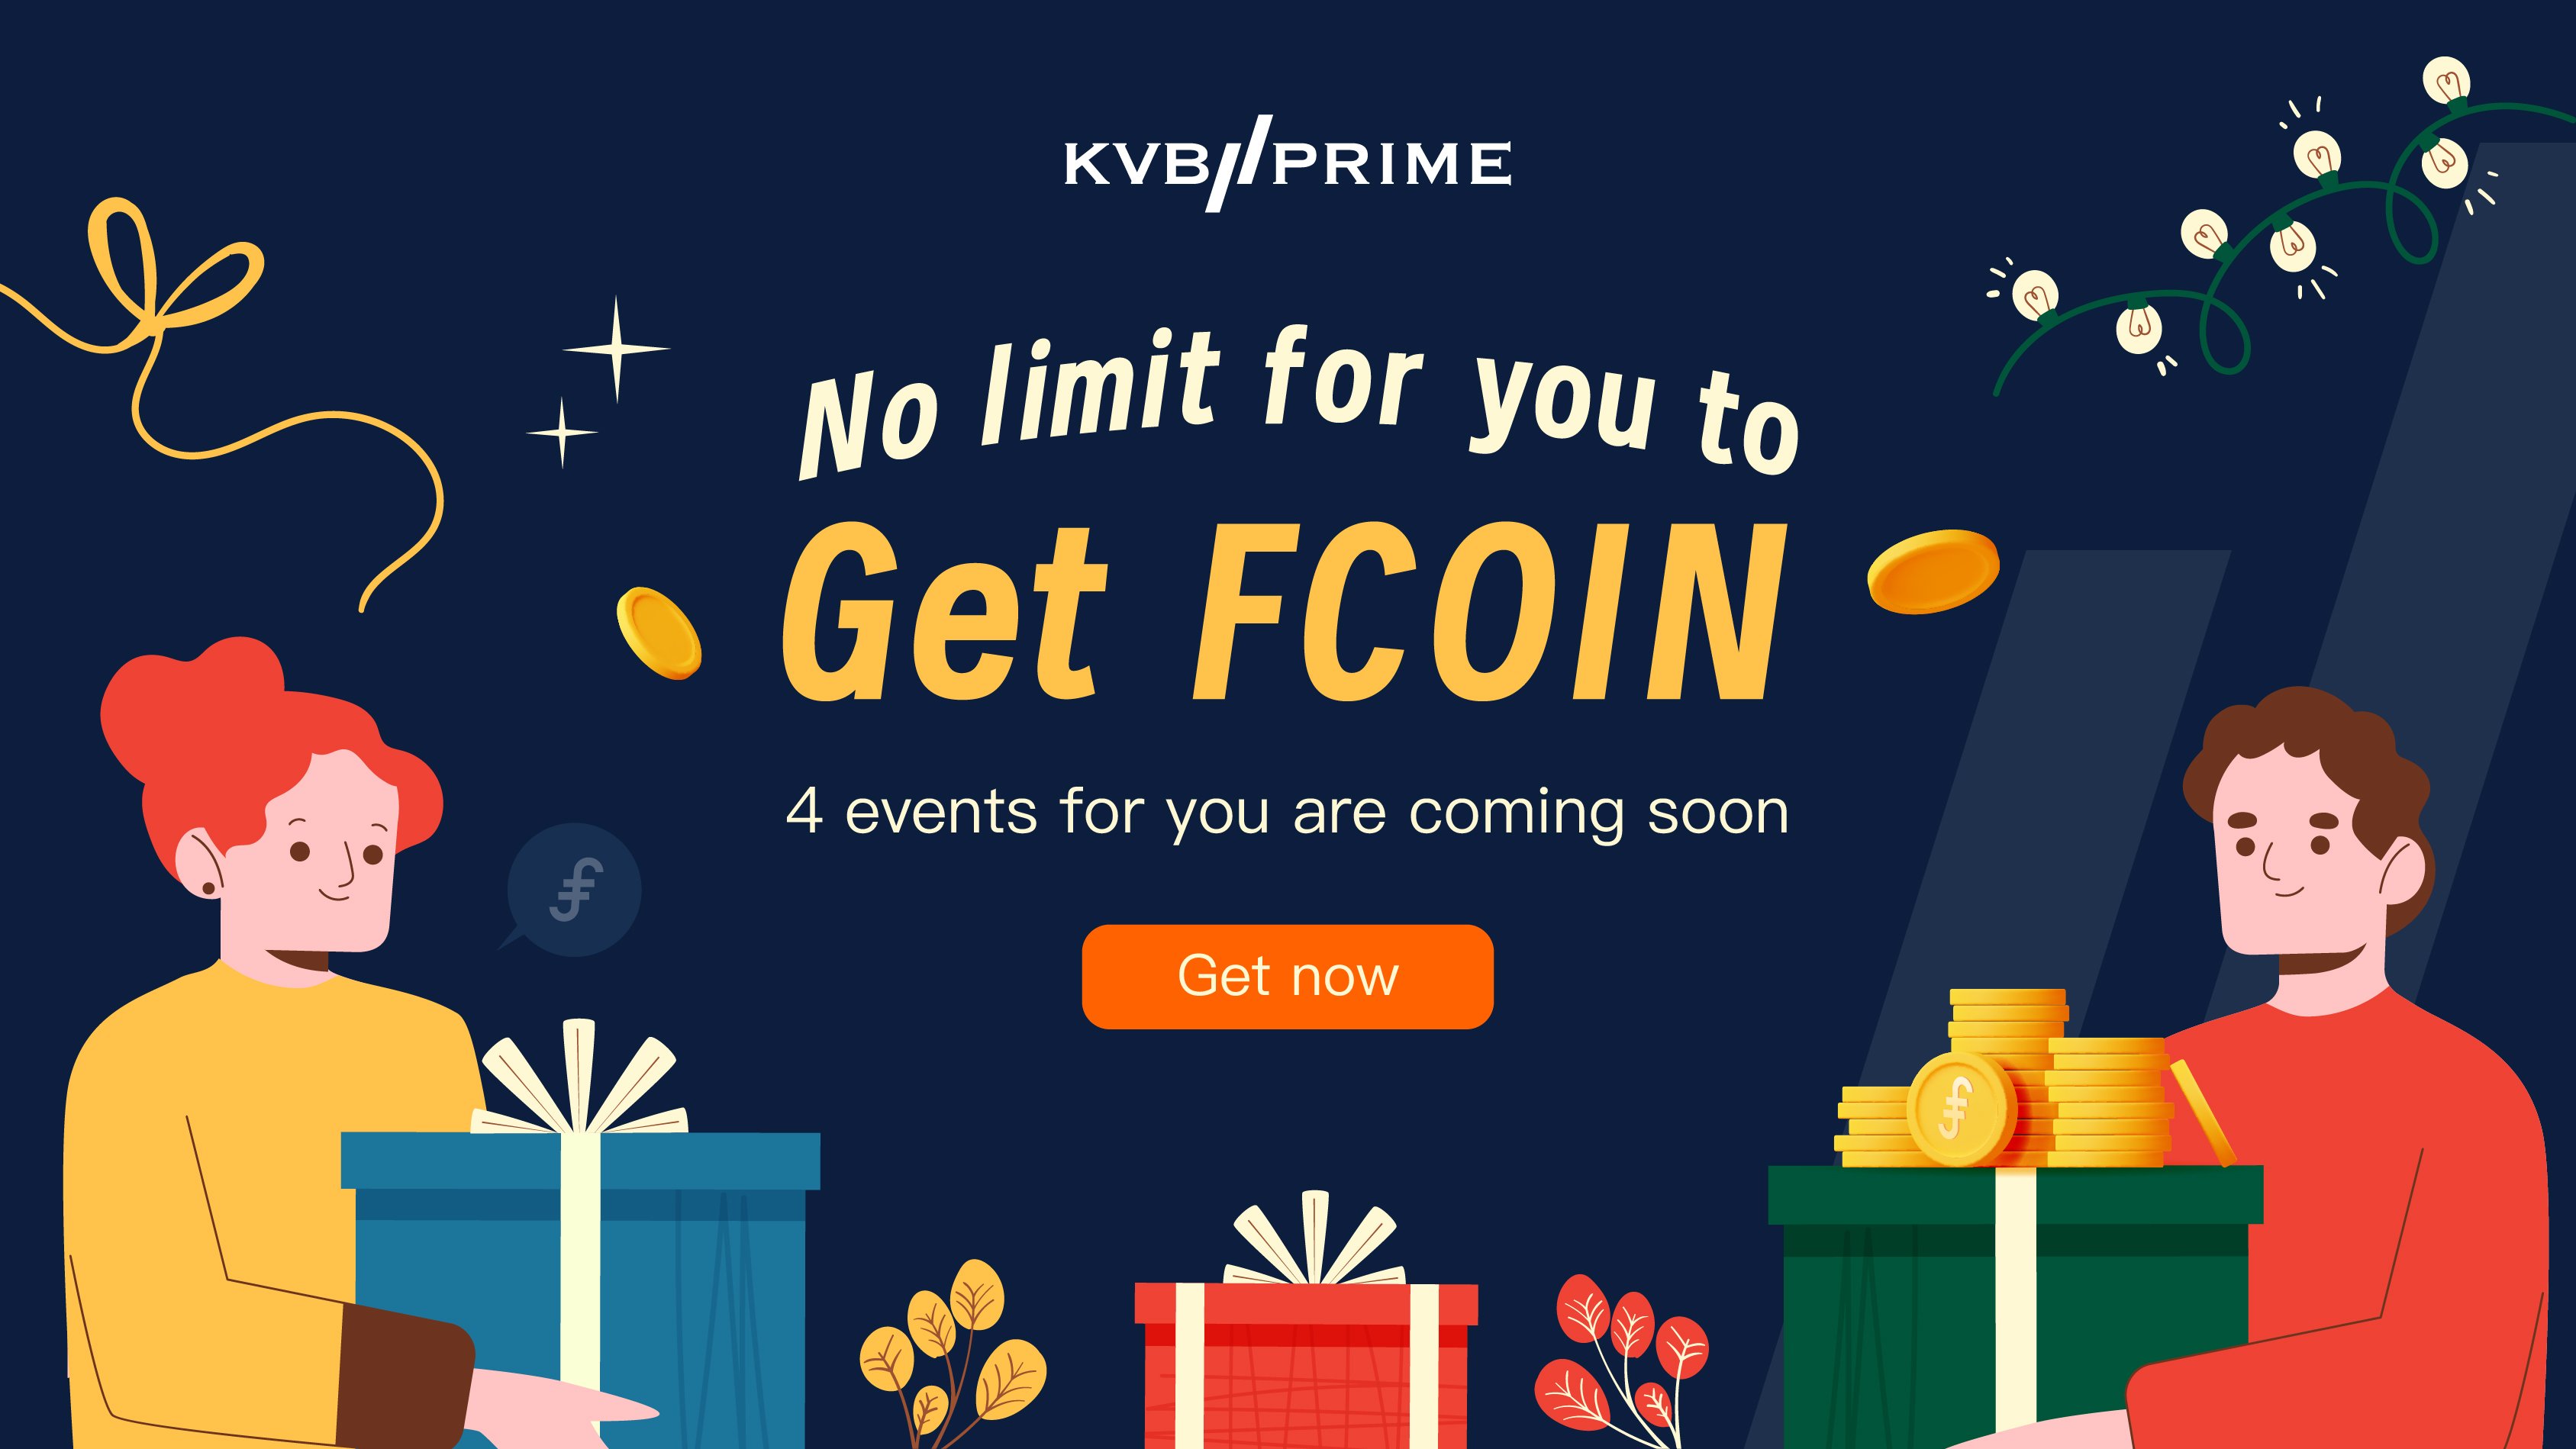 No limit for you to GET FCOIN with a KVB Prime account